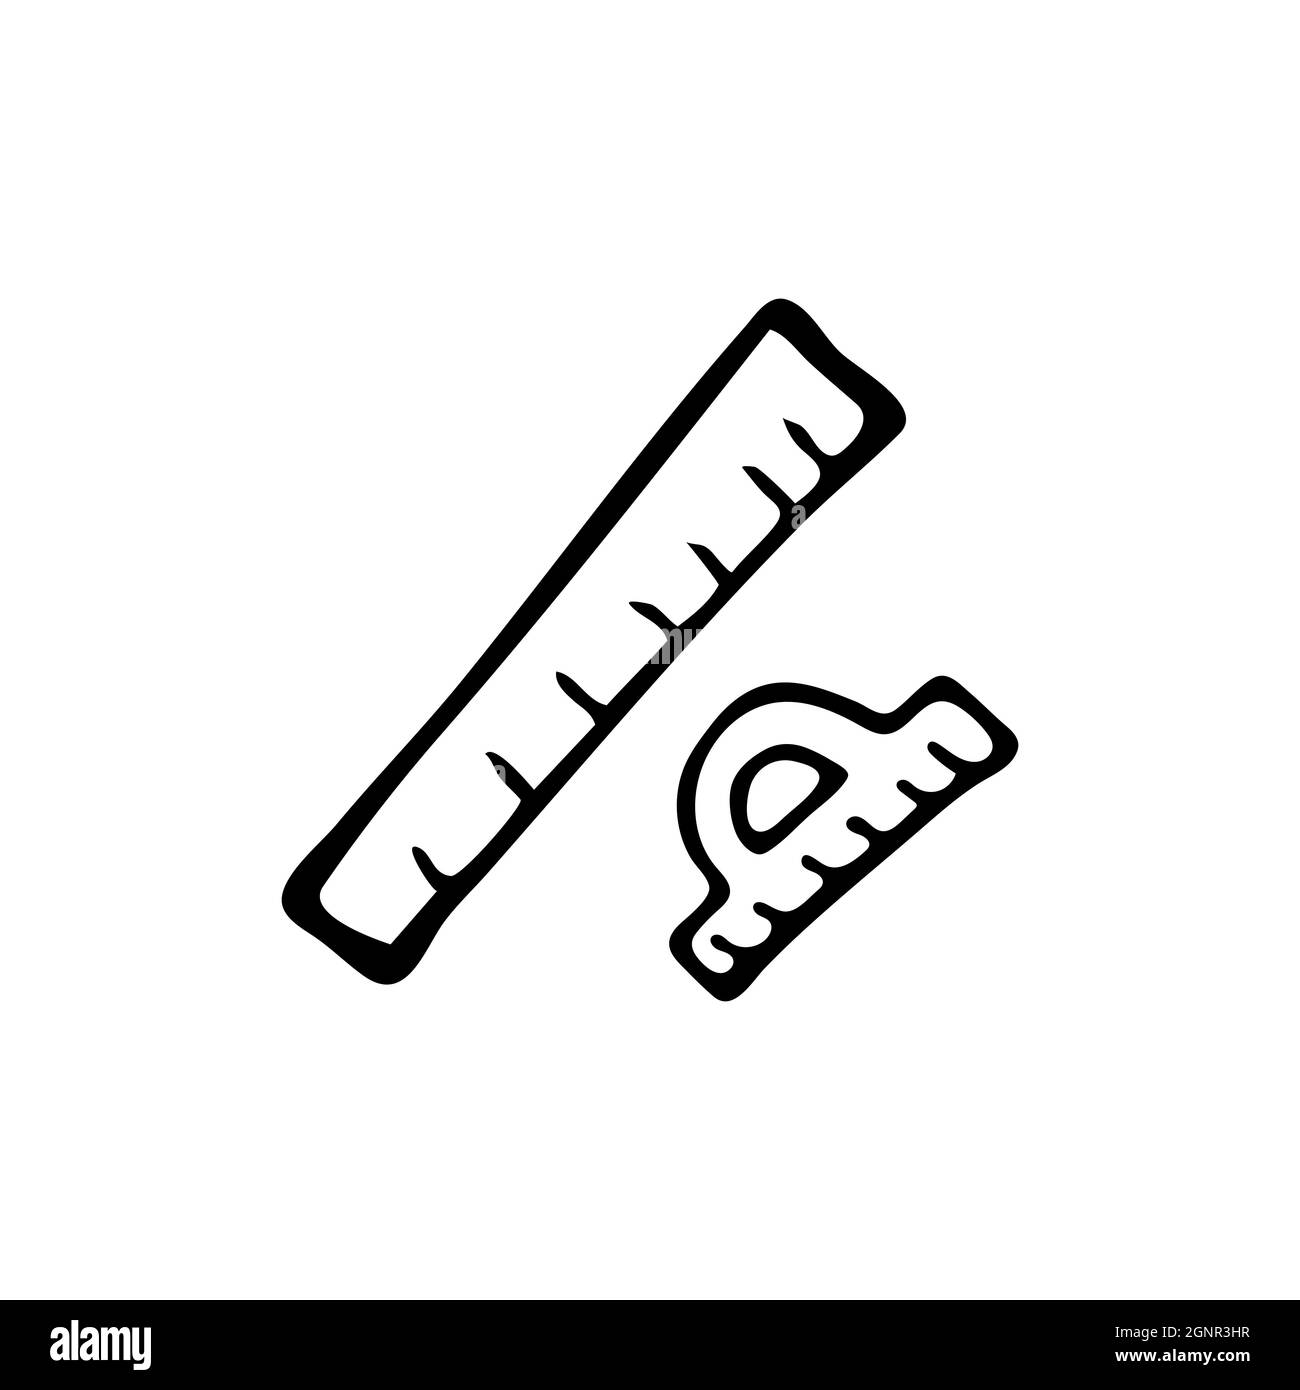 Hand drawn doodle style rulers in vector. Isolated illustration on white background. For interior design, wallpaper, packaging, poster Stock Vector